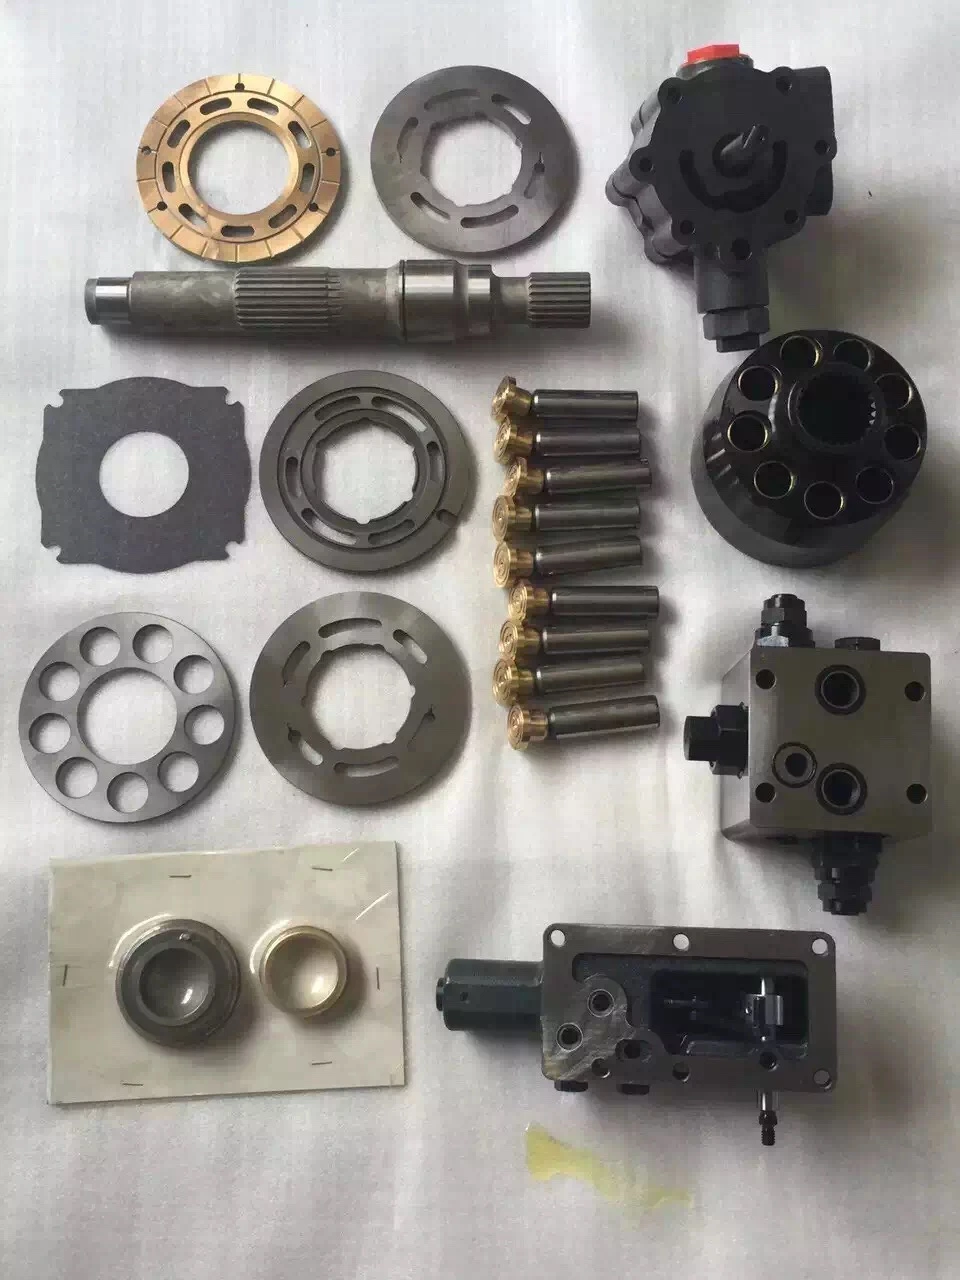 Rexroth A4vg125 Hydraulic Pump Spare Parts for Engine Alternator Cylinder Block, Piston, Valve Plate, Retainer Plate, Shaft, Swash Plate with Best Price Factory